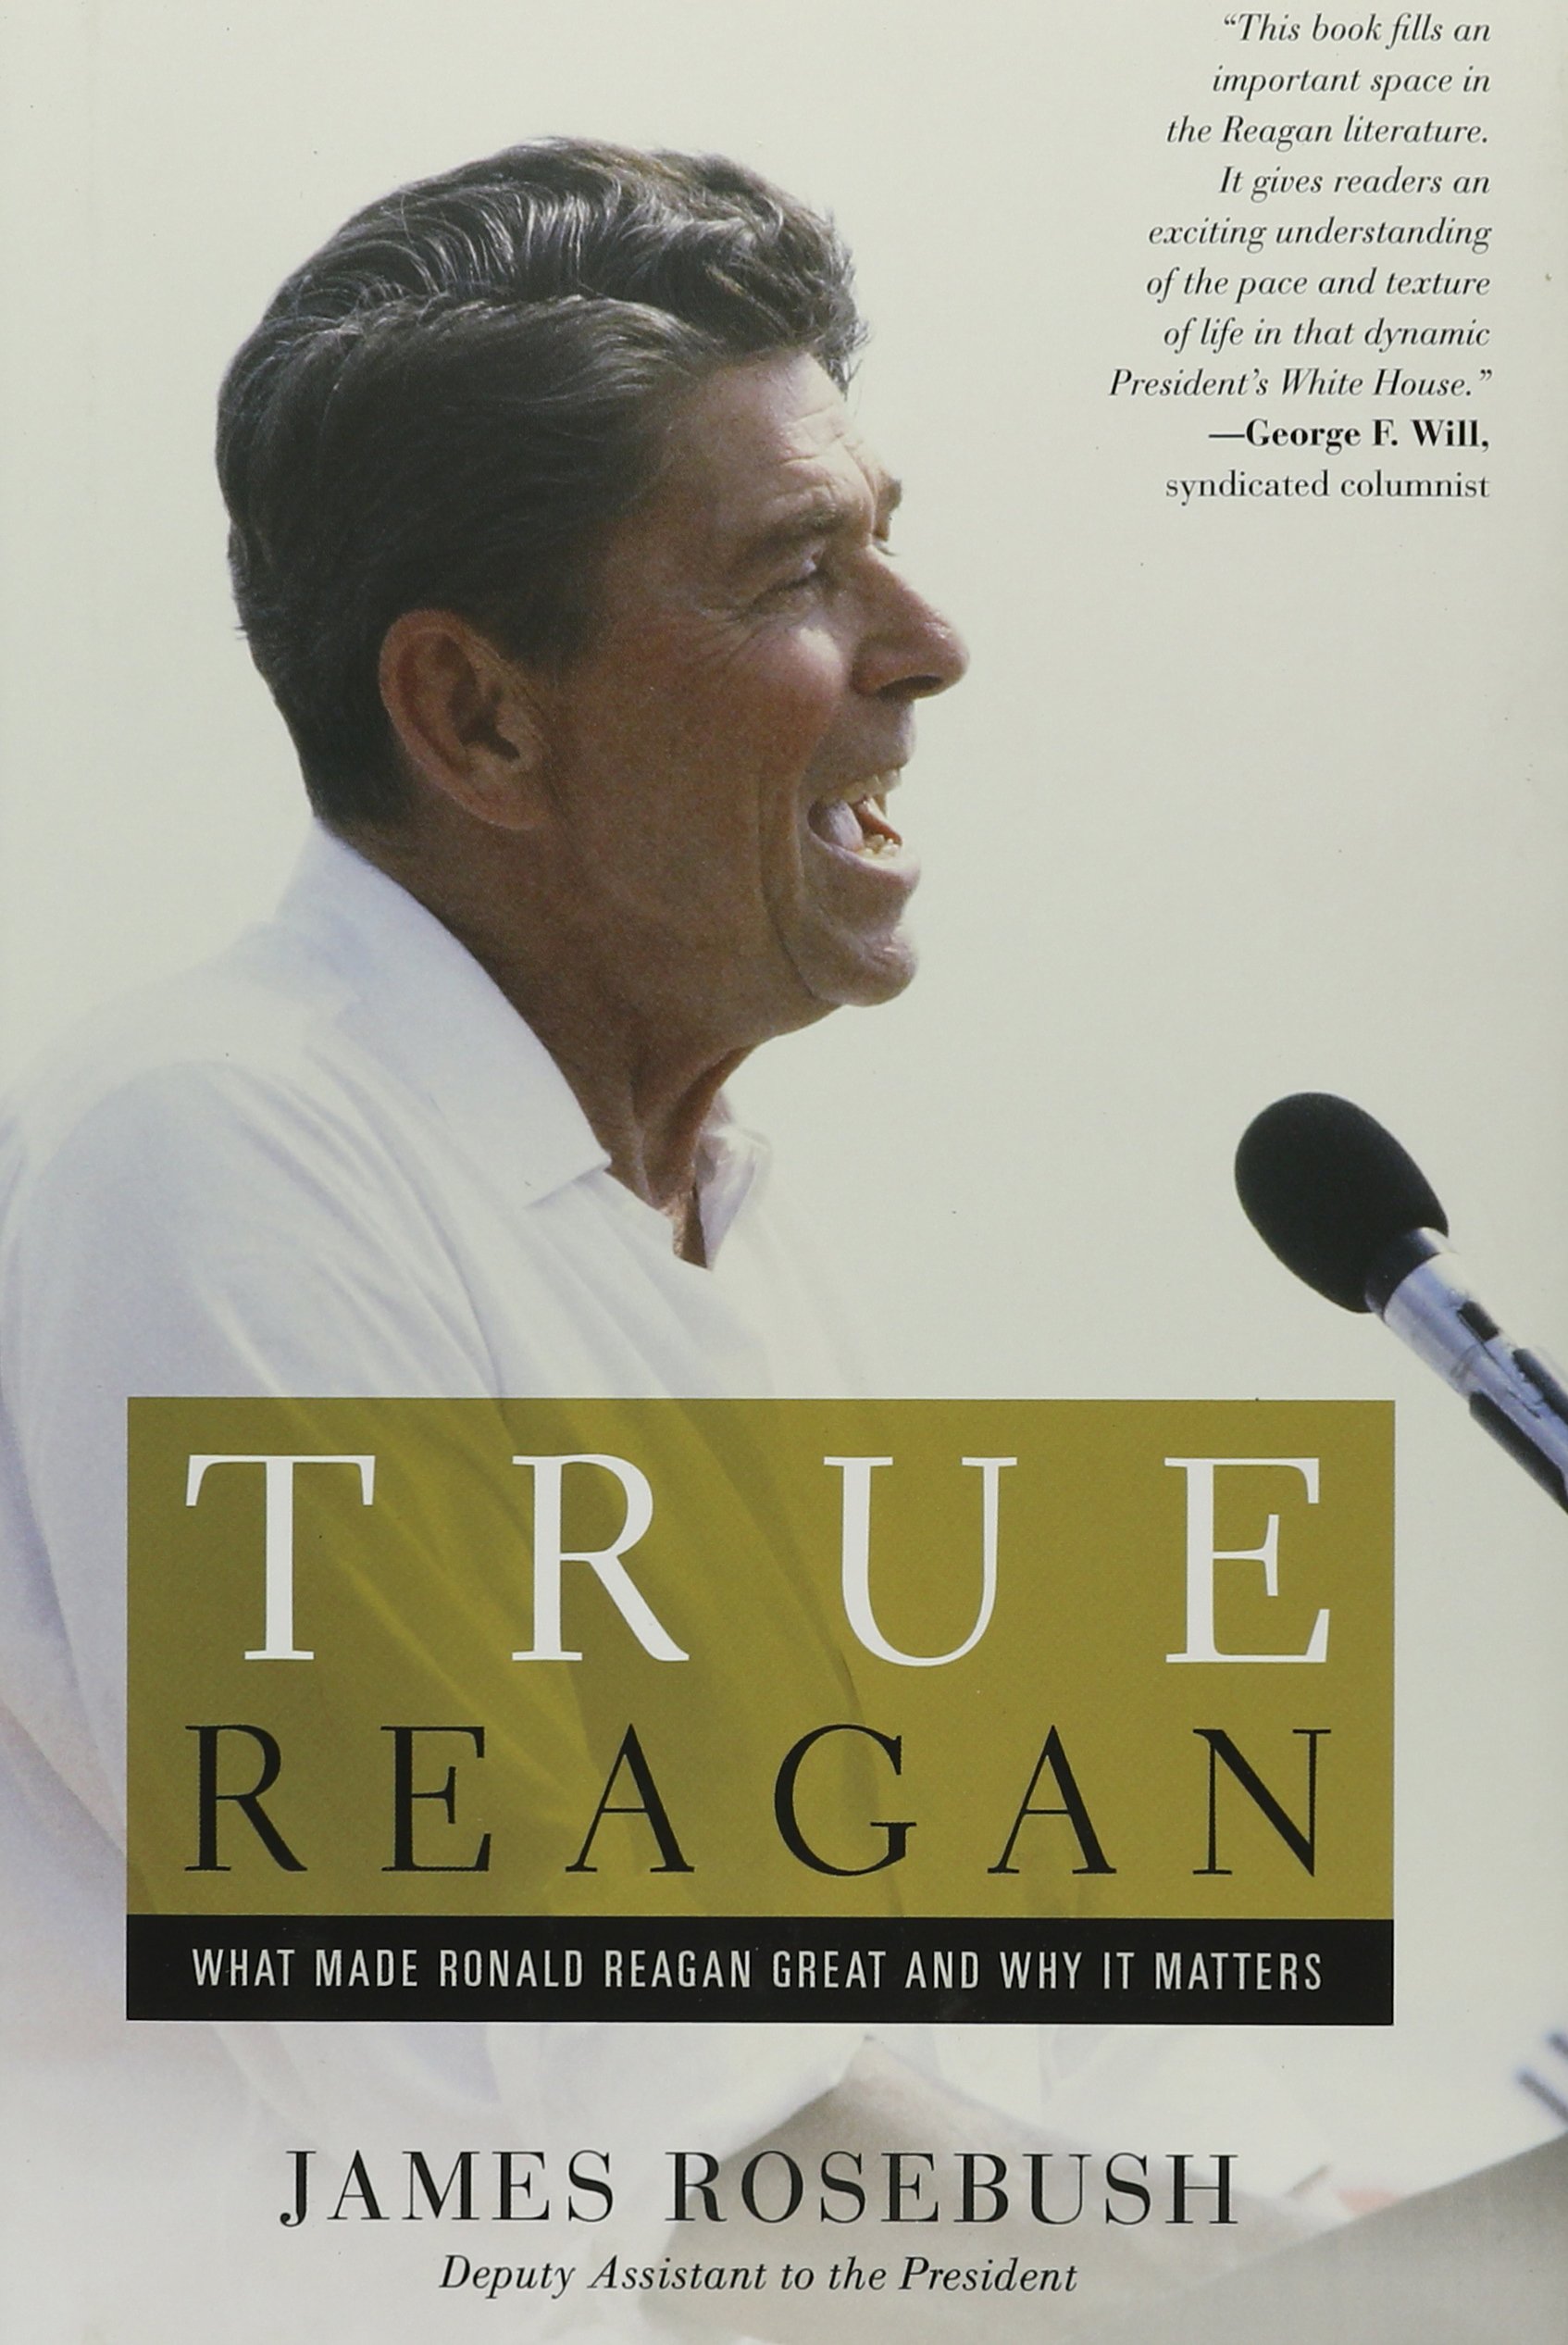 What　It　Matters　Made　Why　Great　Ronald　and　Reagan　BookPal　True　Reagan: